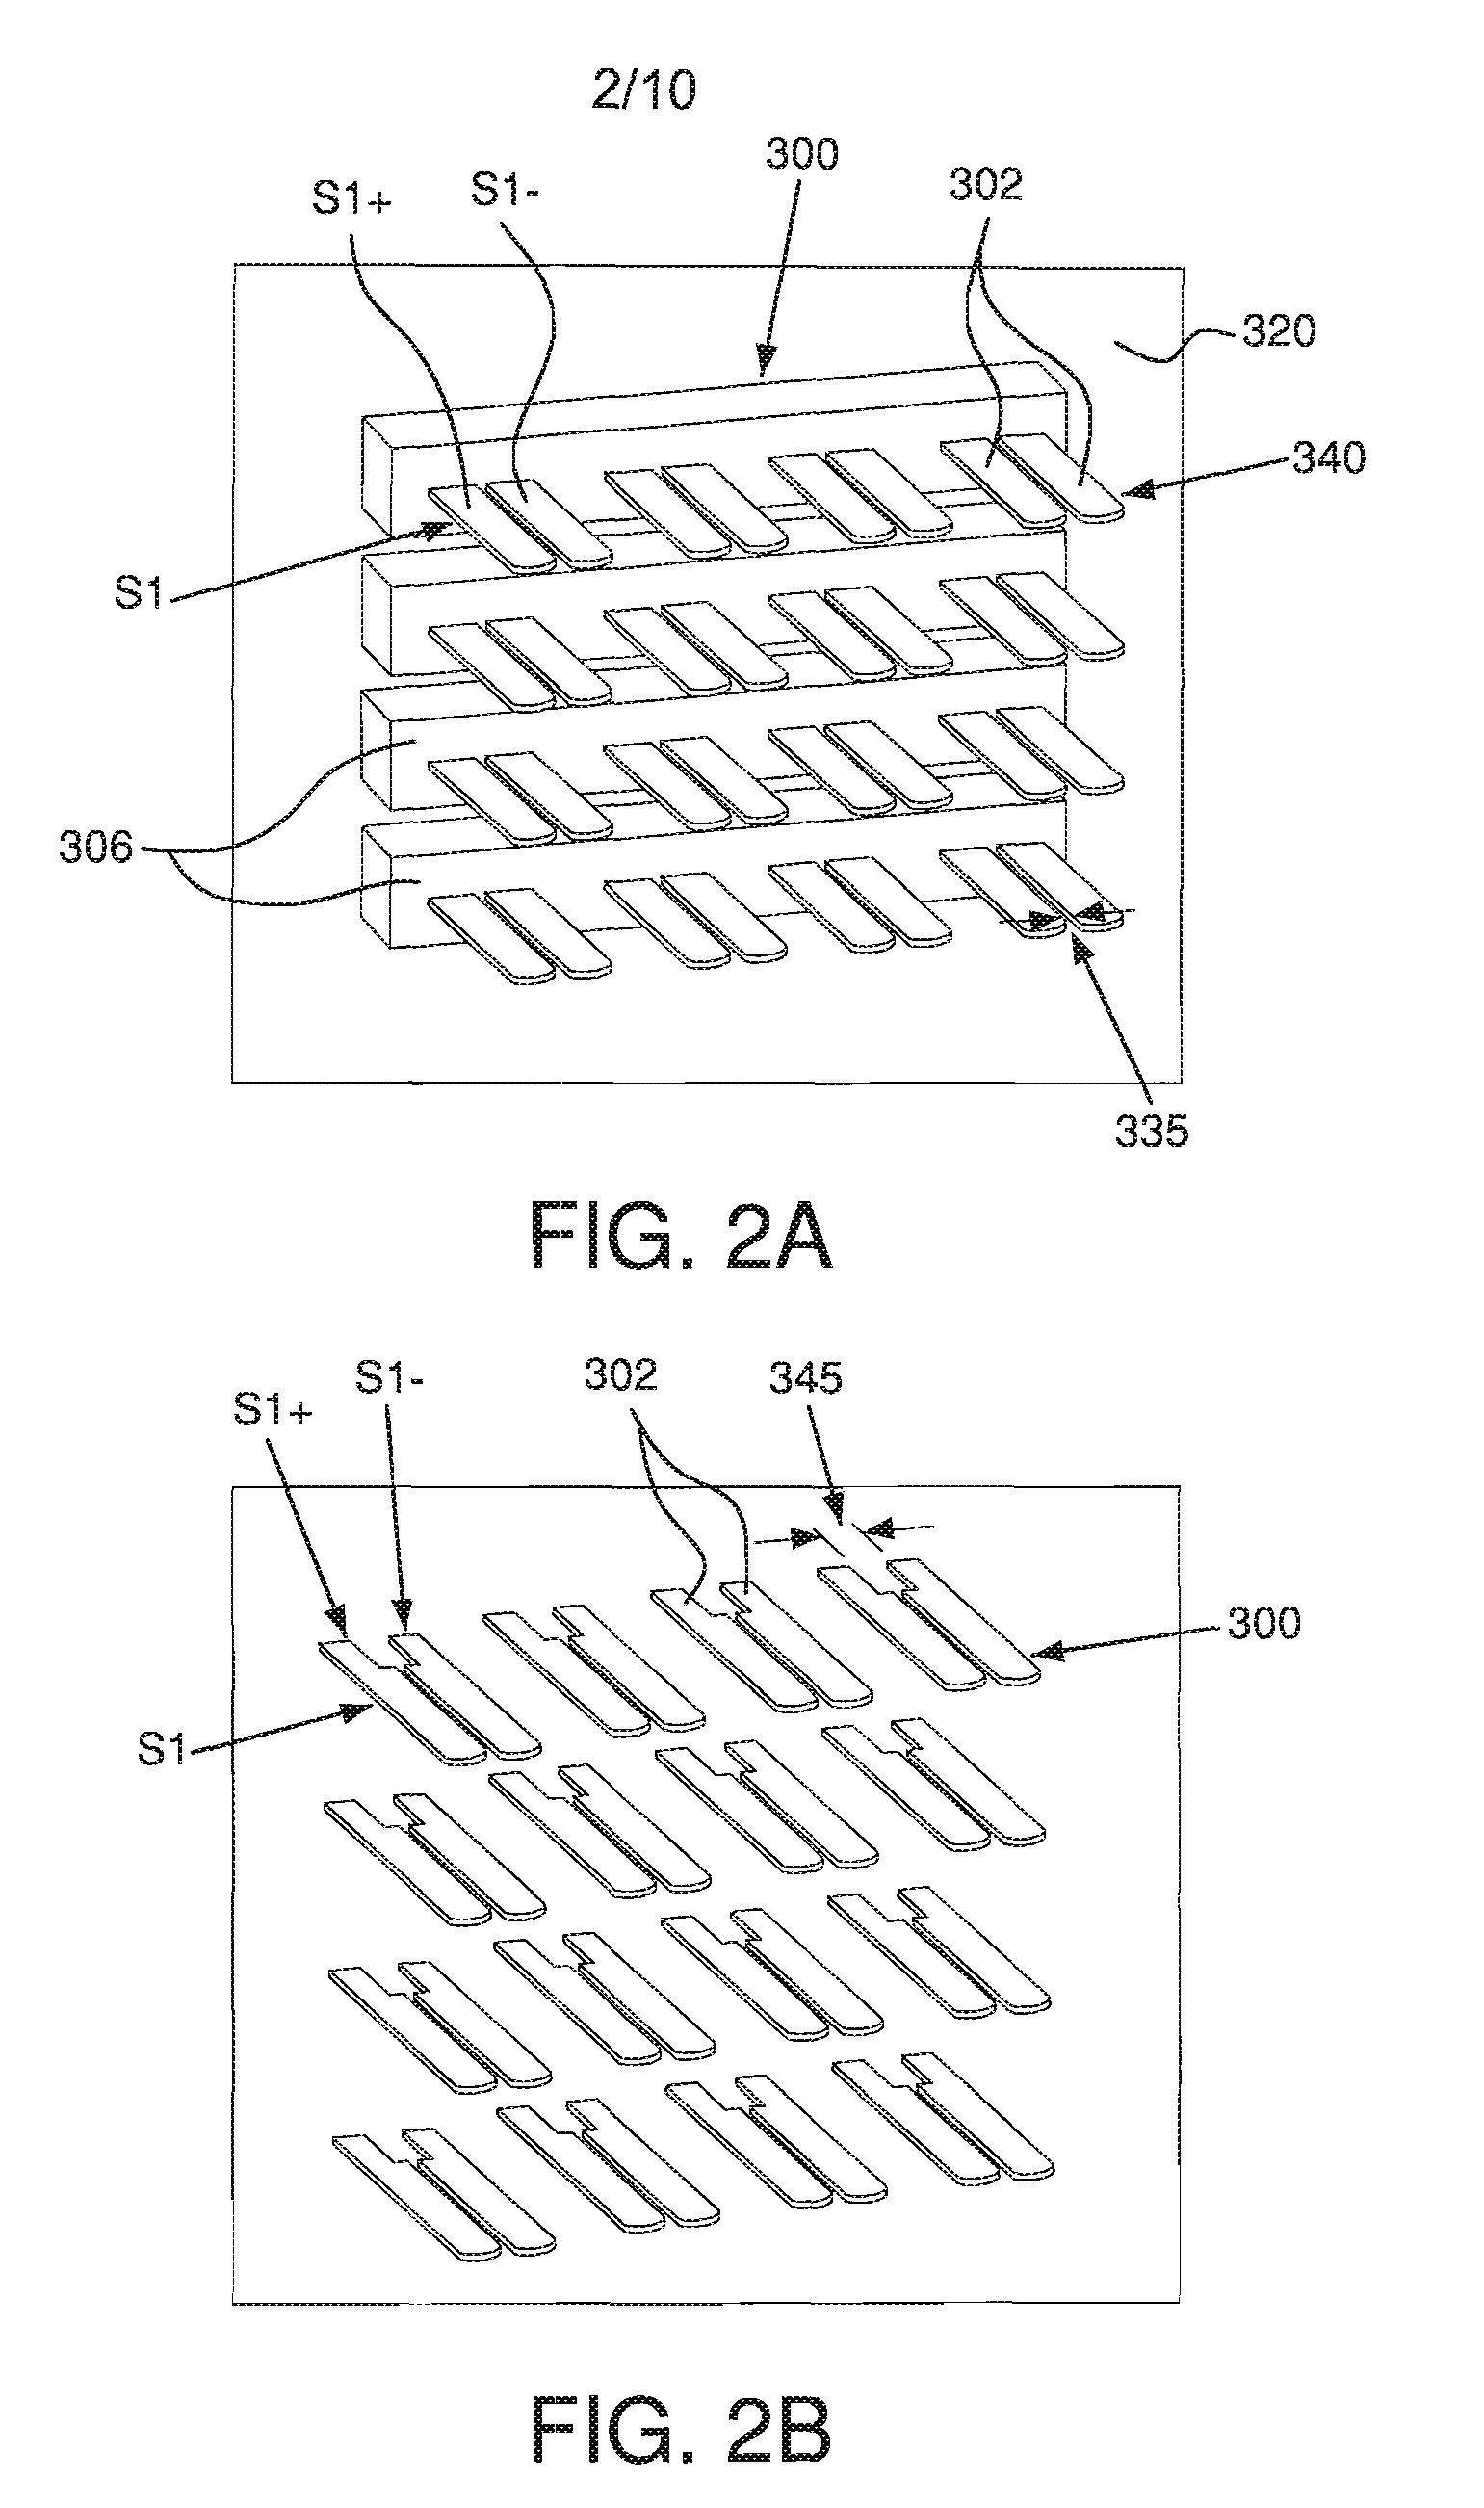 Broadside-to-edge-coupling connector system